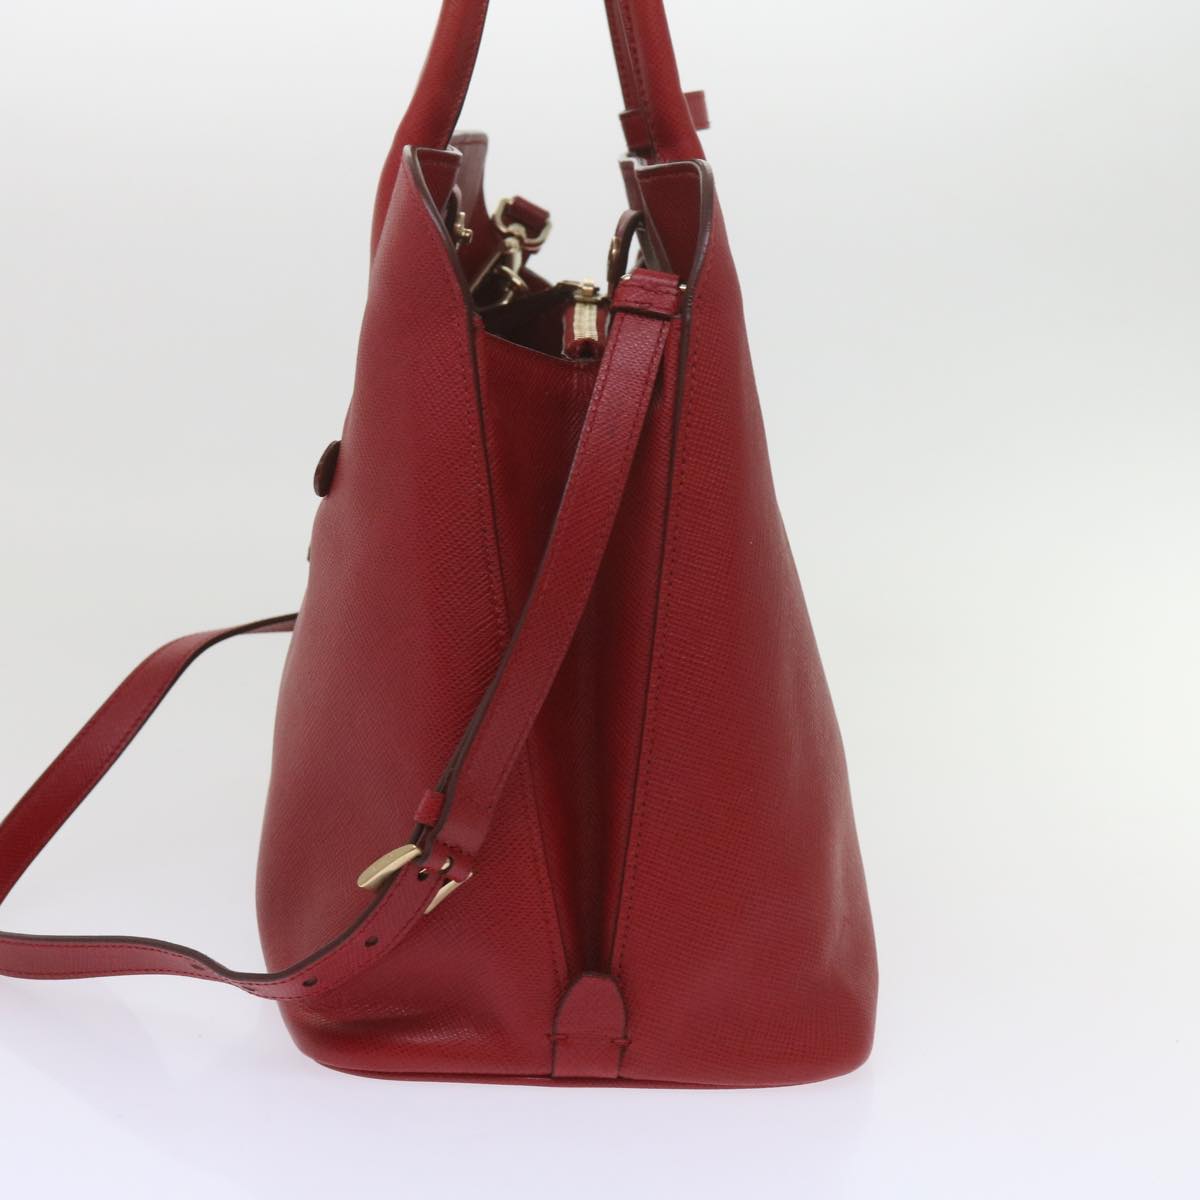 PRADA Hand Bag Leather 2way Red Auth bs10429